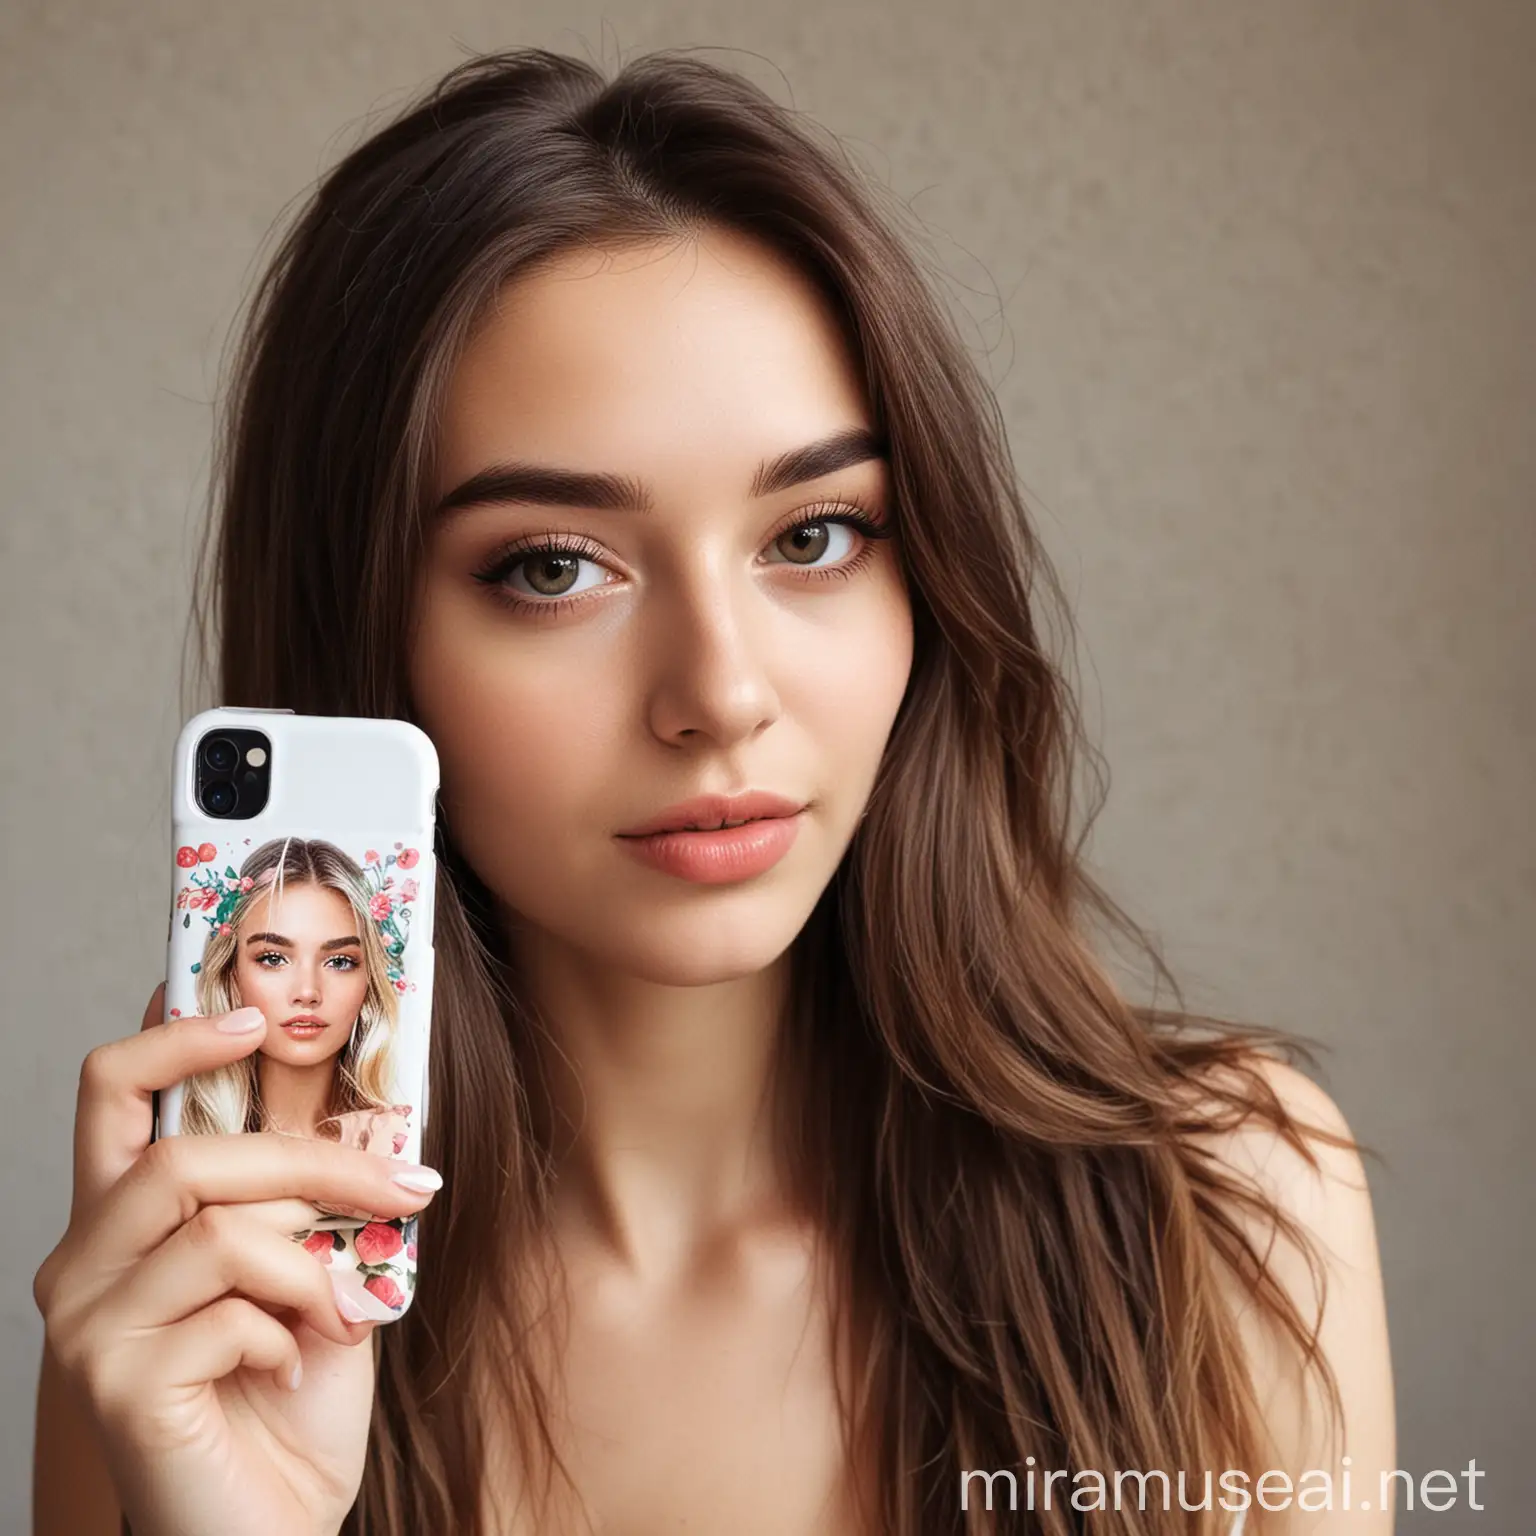 Elegant Foreign Woman Capturing Selfies with Stylish Phone Case